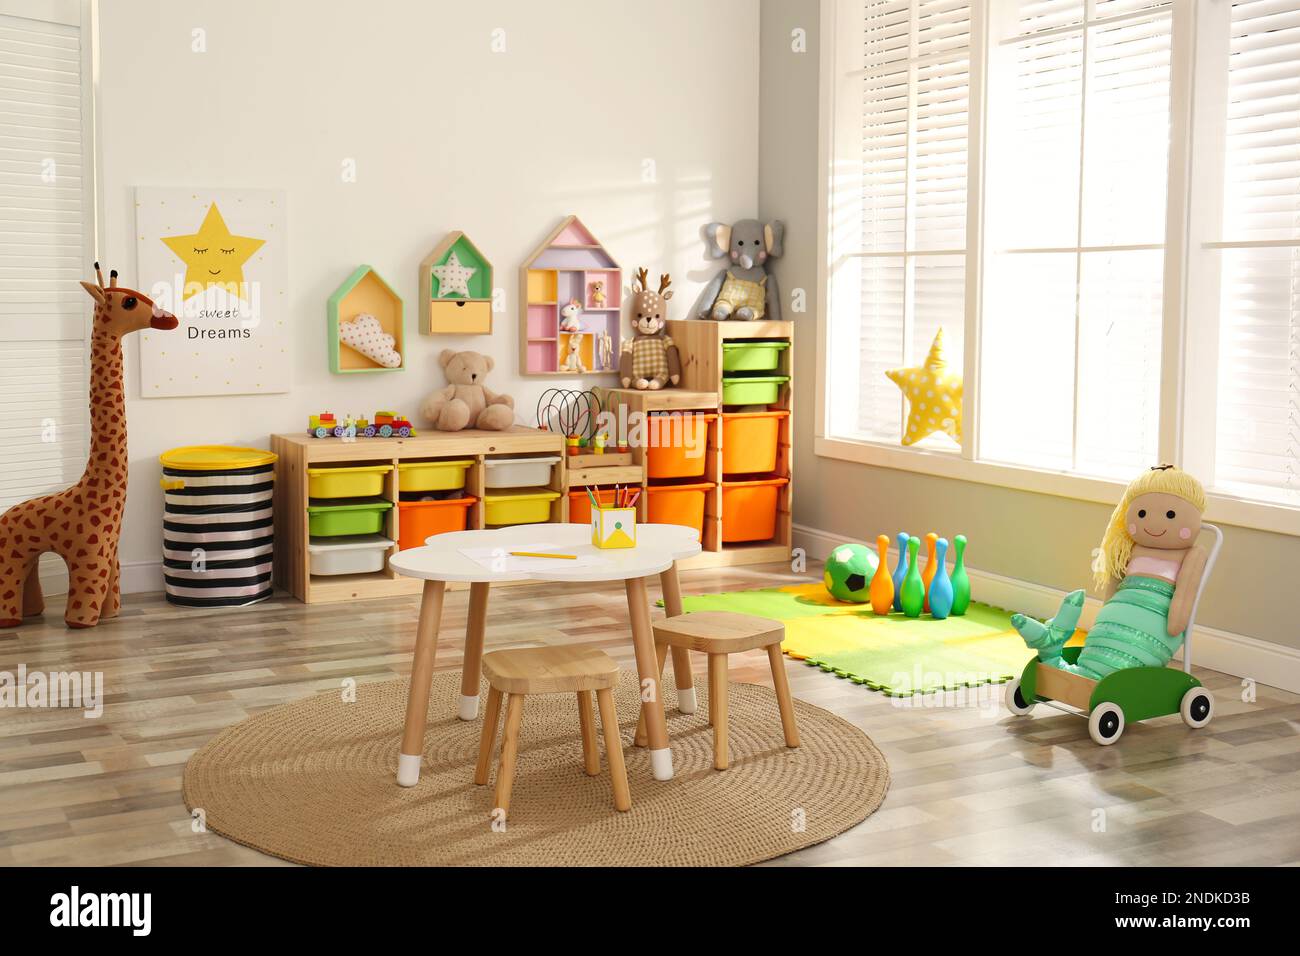 Stylish playroom interior with soft toys and modern furniture Stock Photo